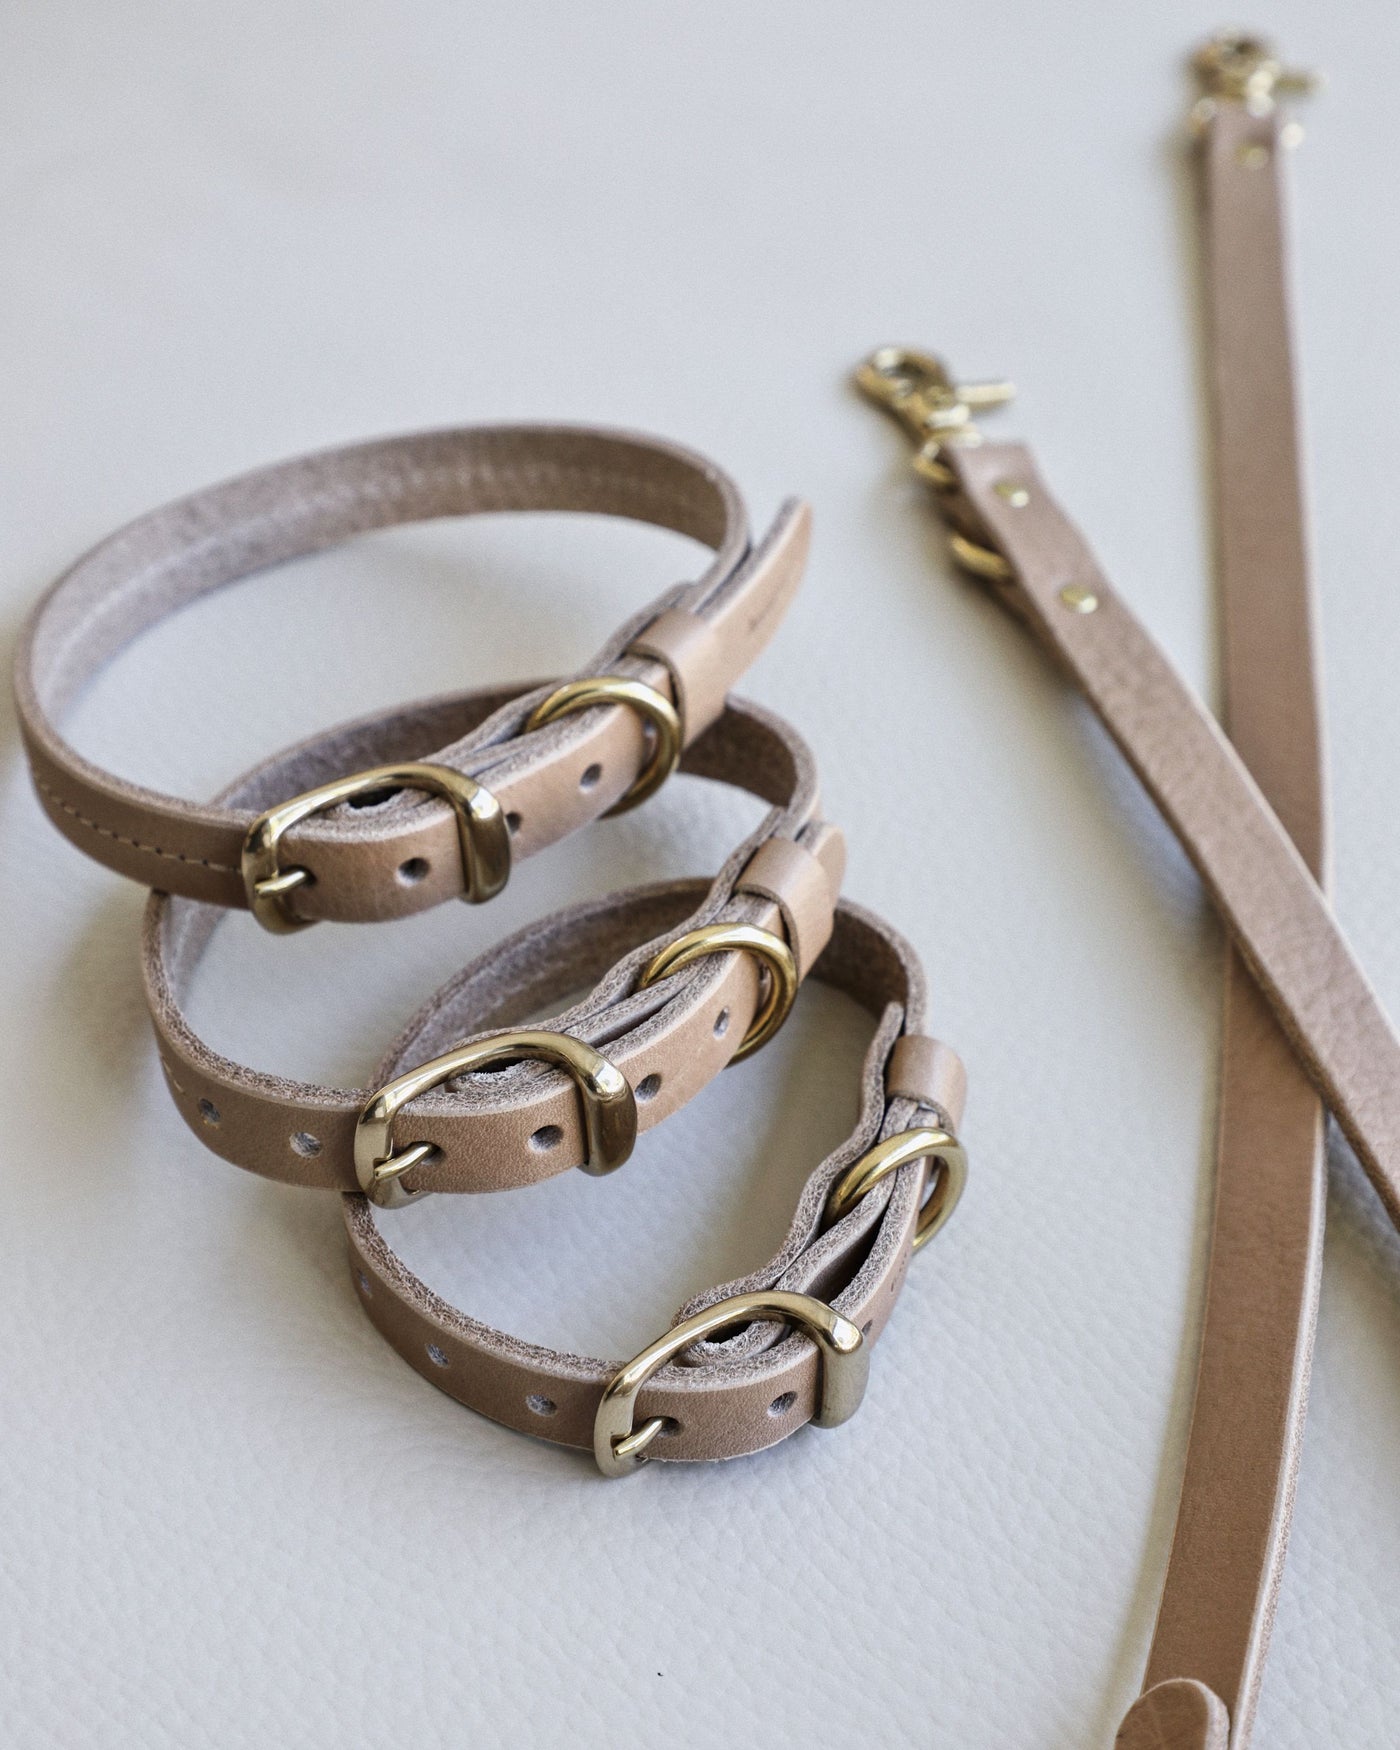 stack of three taupe leather dog collars next to matching taupe leather dog leash